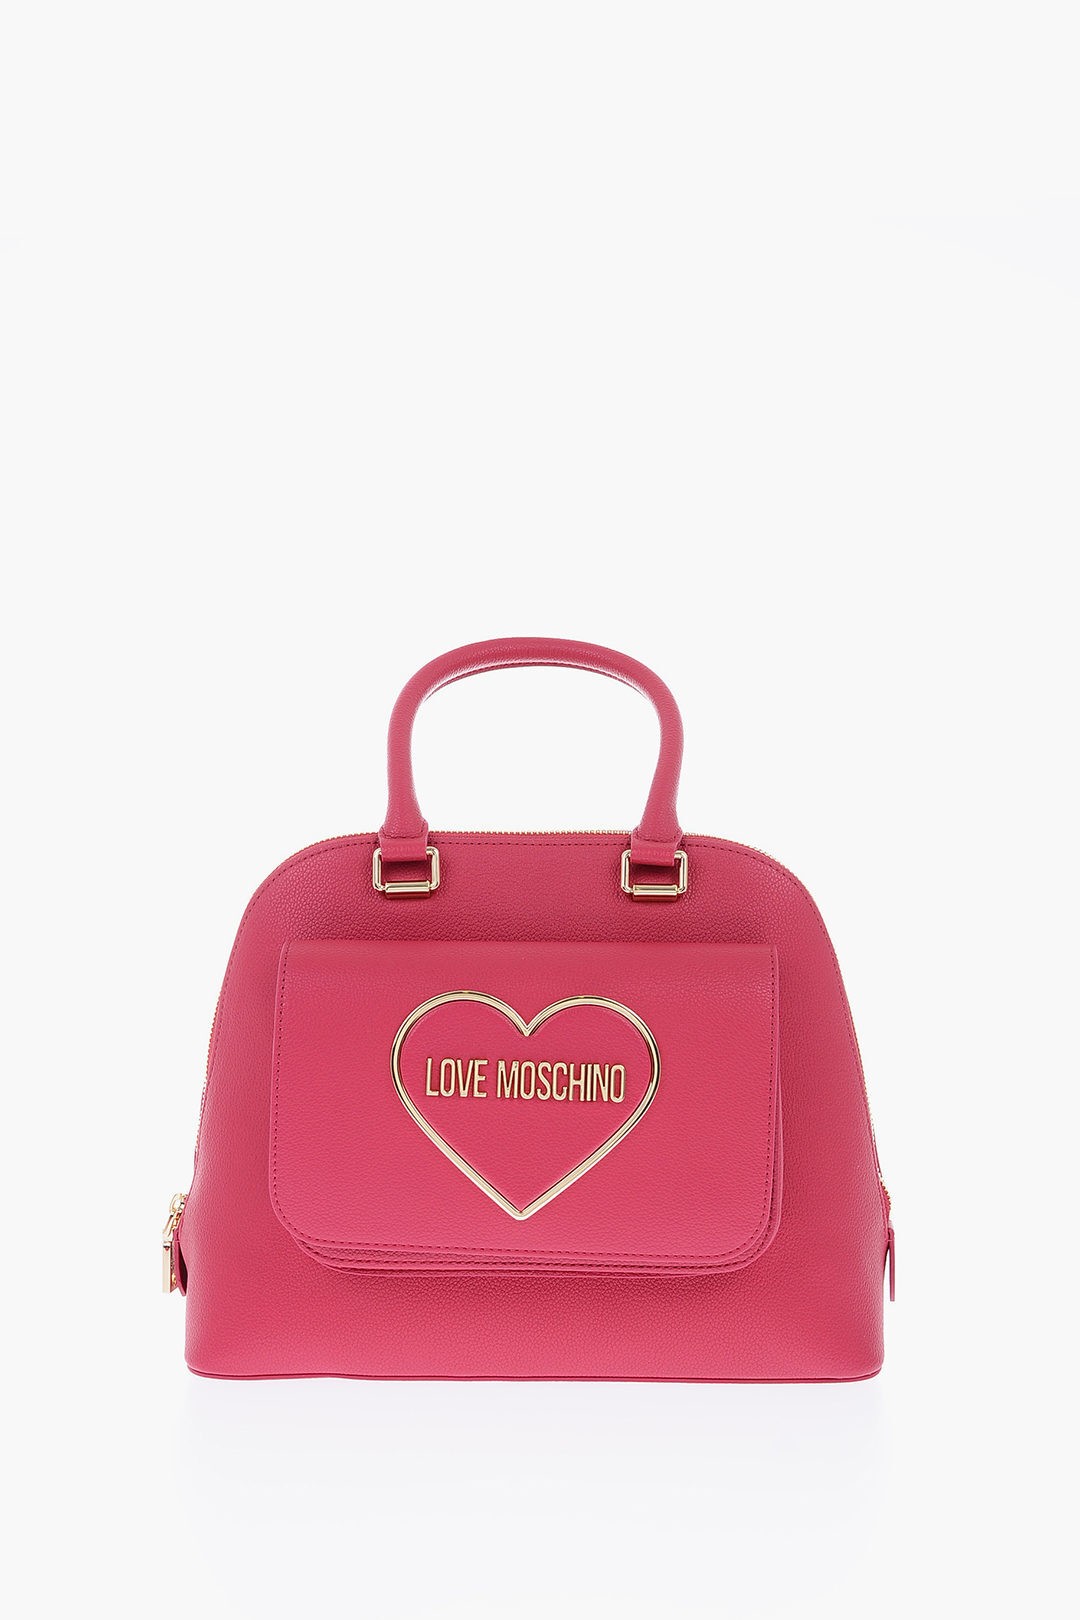 ڳŷѡSALE!!30000߰ʾ2000OFFݥоݡ MOSCHINO ⥹ Хå JC4143PP1FLR0604 ǥ LOVE TEXTURED FAUX LEATHER HAND BAG WITH HEART LOGO ڴǡ̵ۡڥåԥ̵ dk